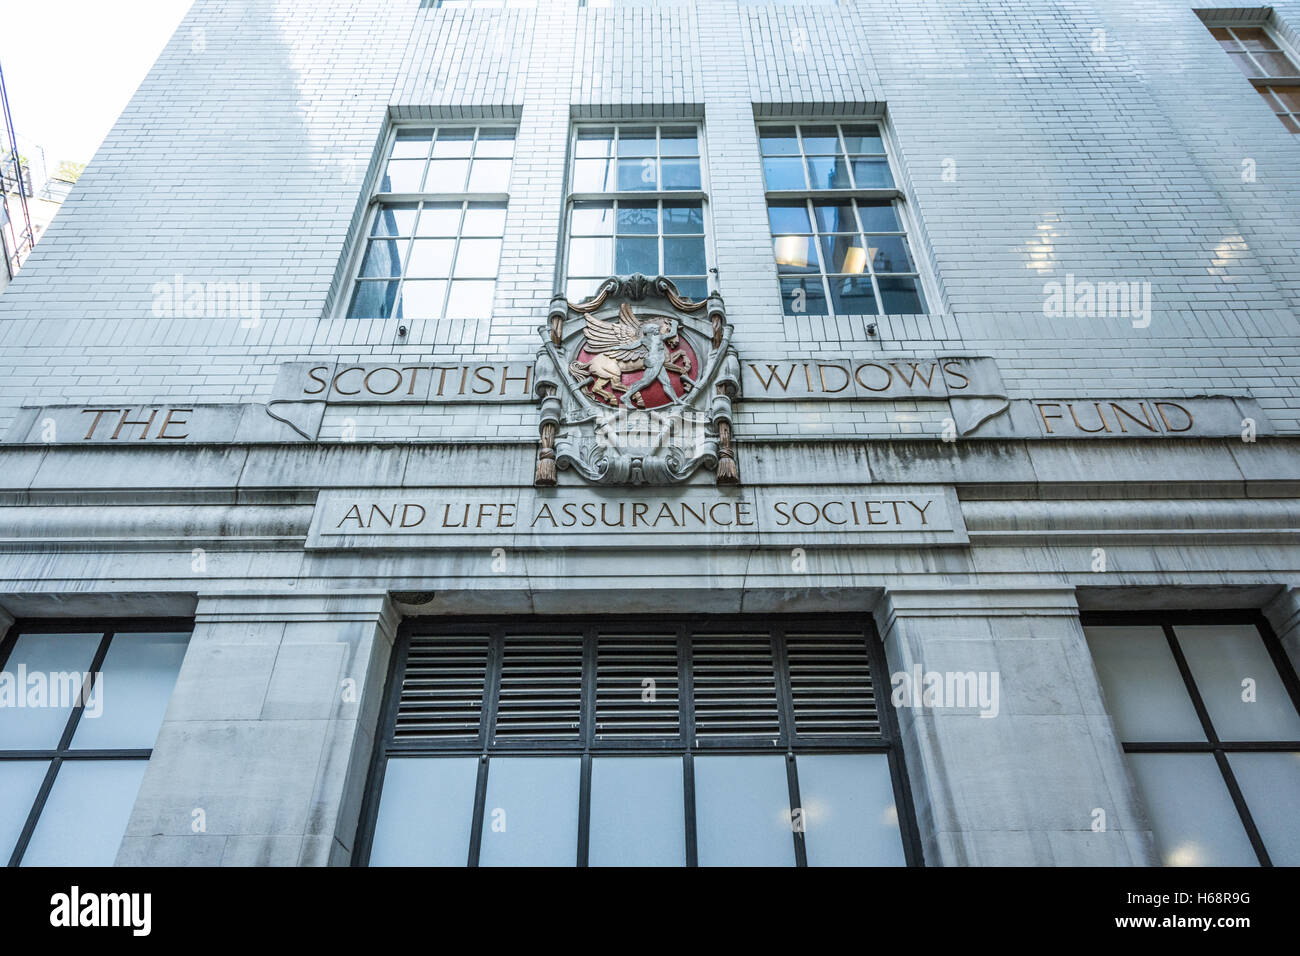 Crest outside the Scottish Widows Fund and Life Assurance Society now part of Lloyds Banking Group Stock Photo